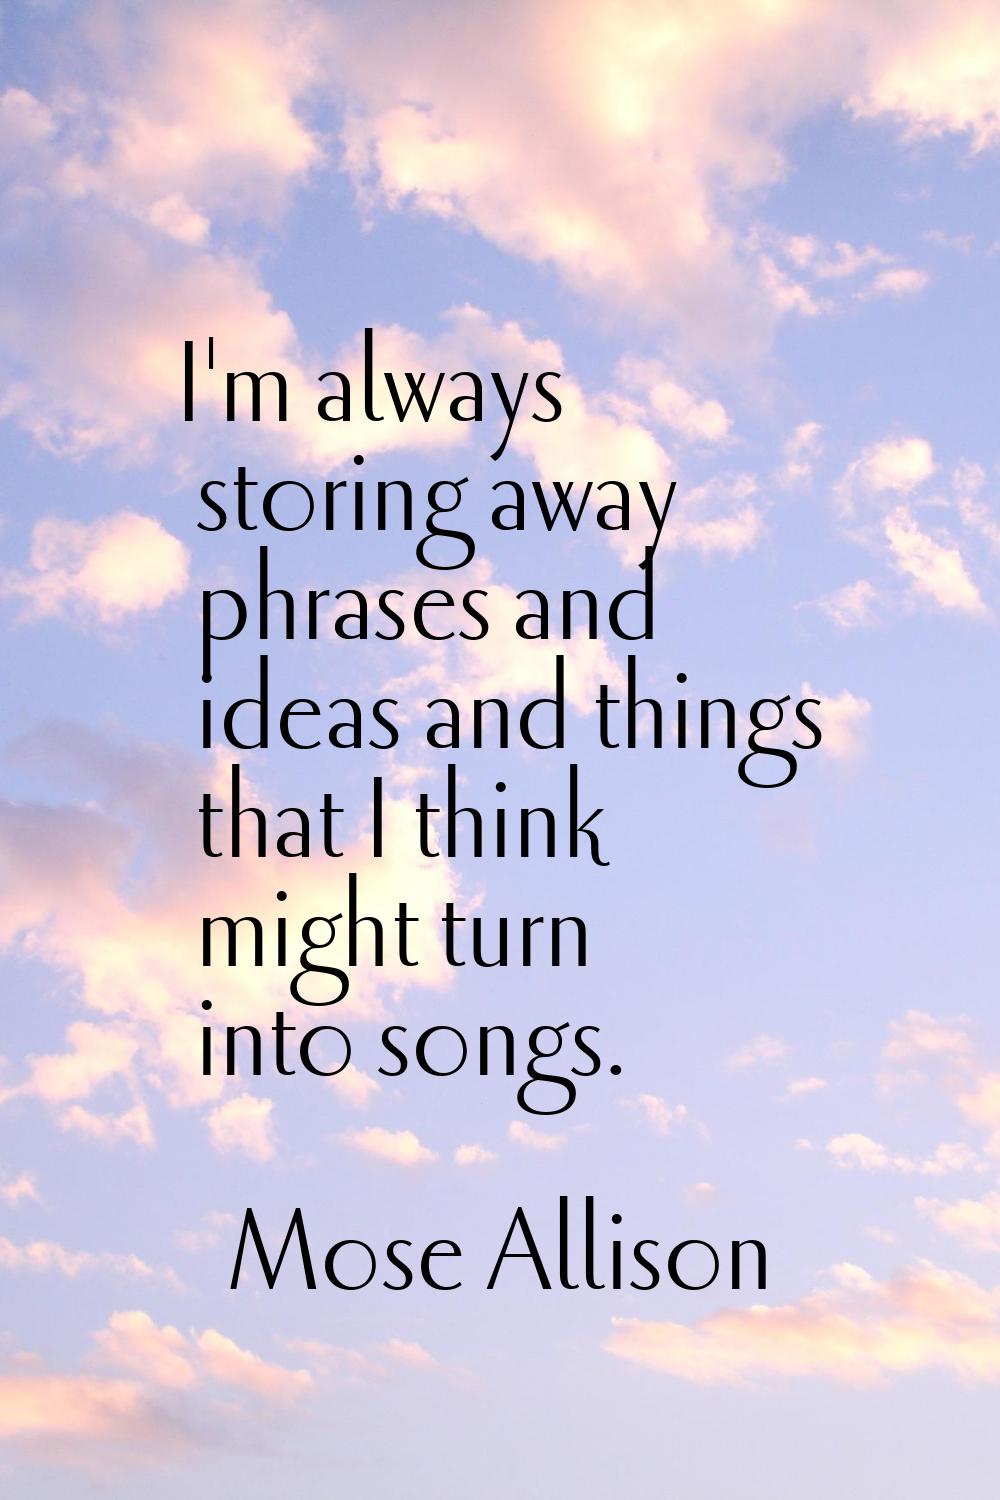 I'm always storing away phrases and ideas and things that I think might turn into songs.